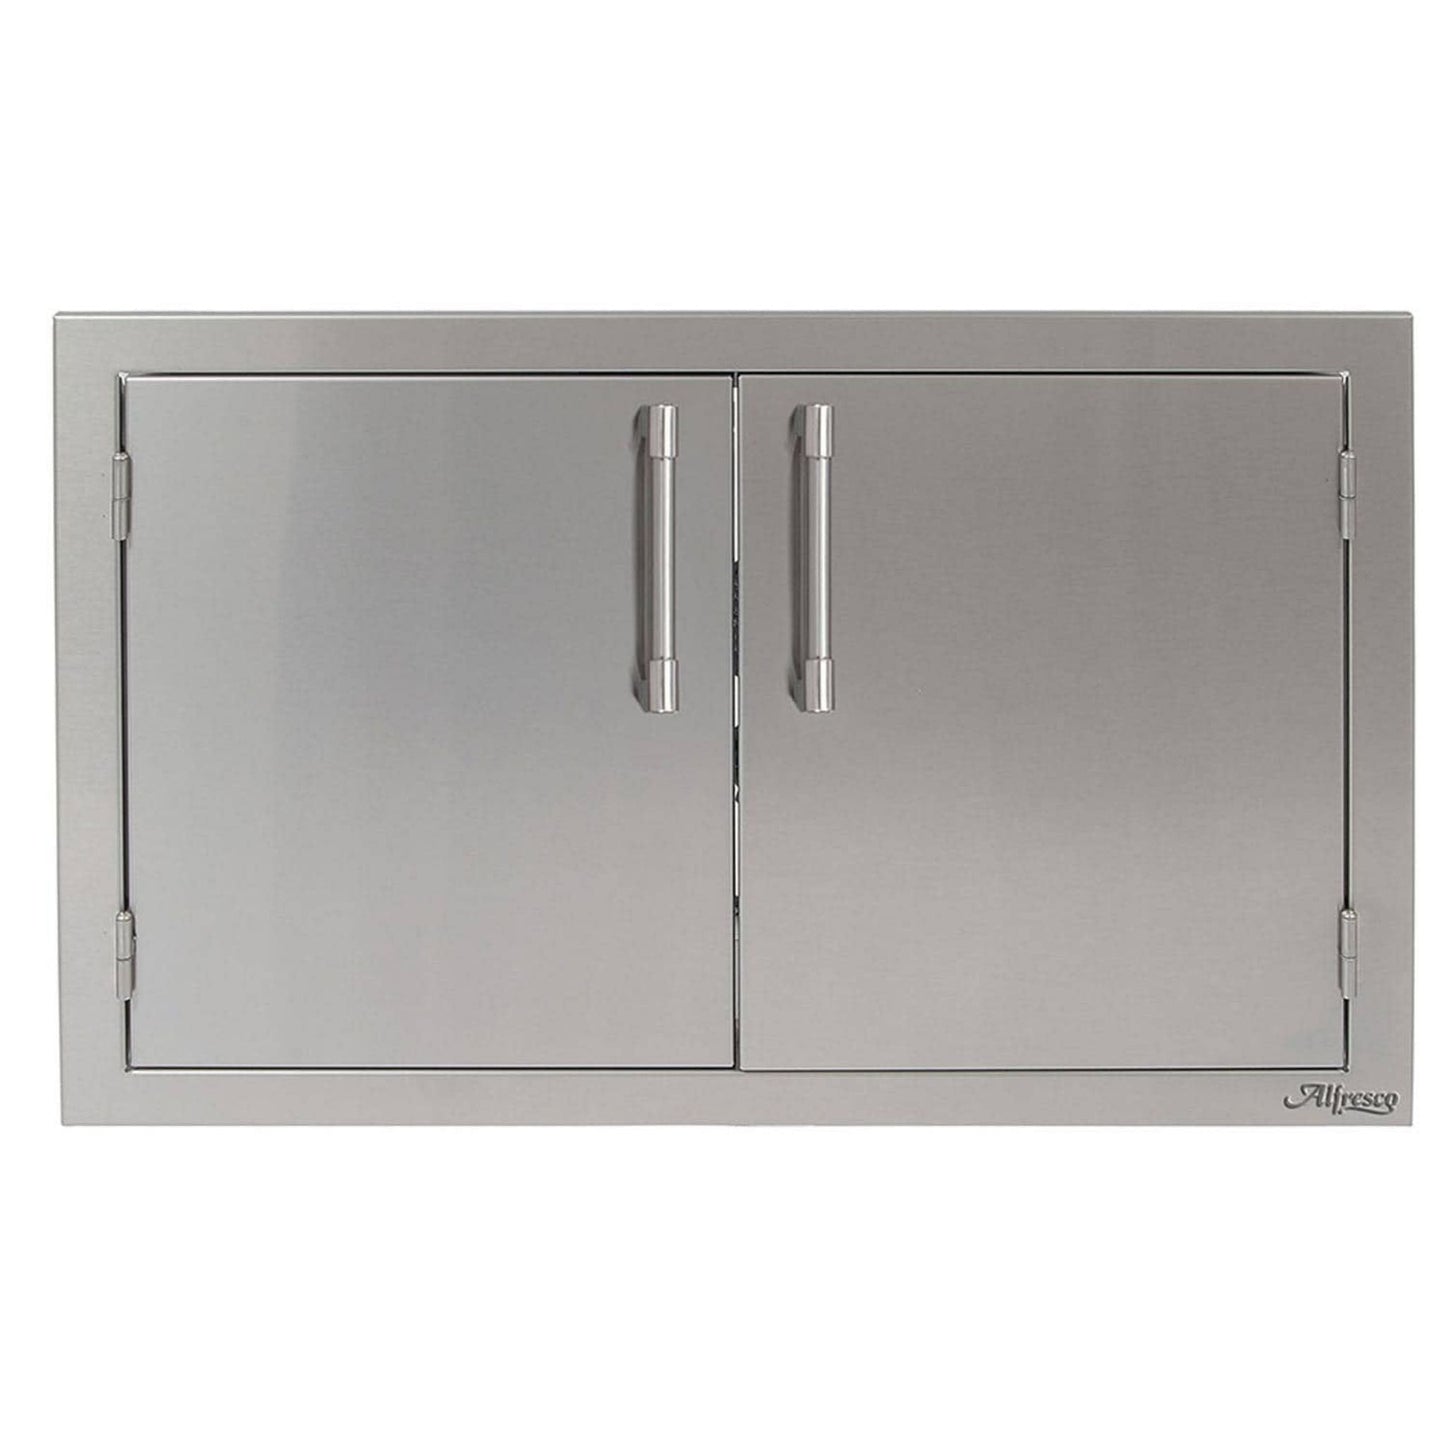 Alfresco 36" Blue Lilac Gloss Stainless Steel Double Access Doors